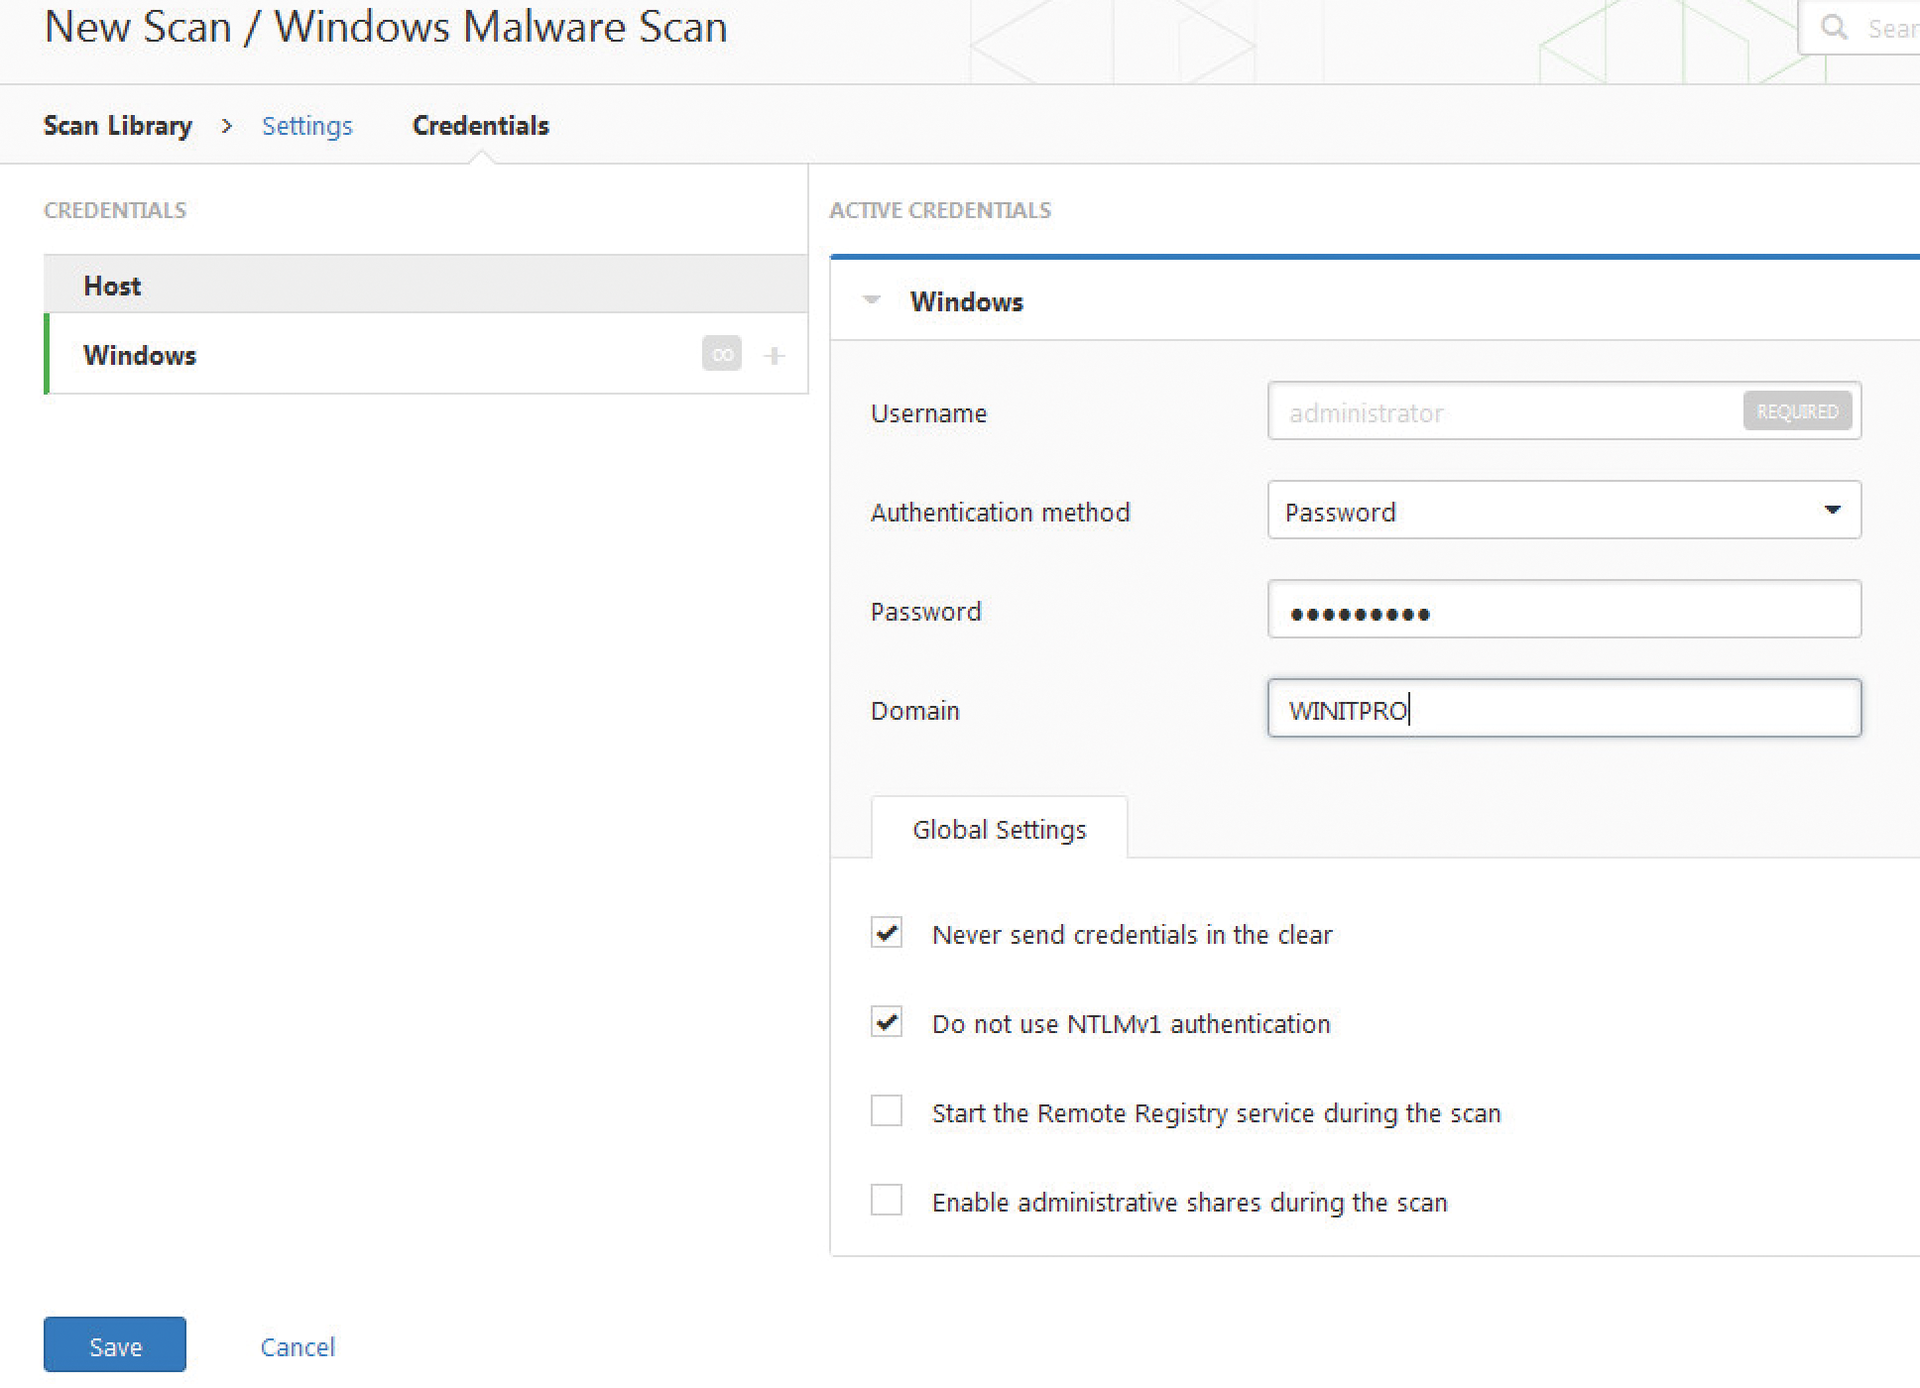 For a malware scan on Windows machines, you need to enter administrative account credentials. 